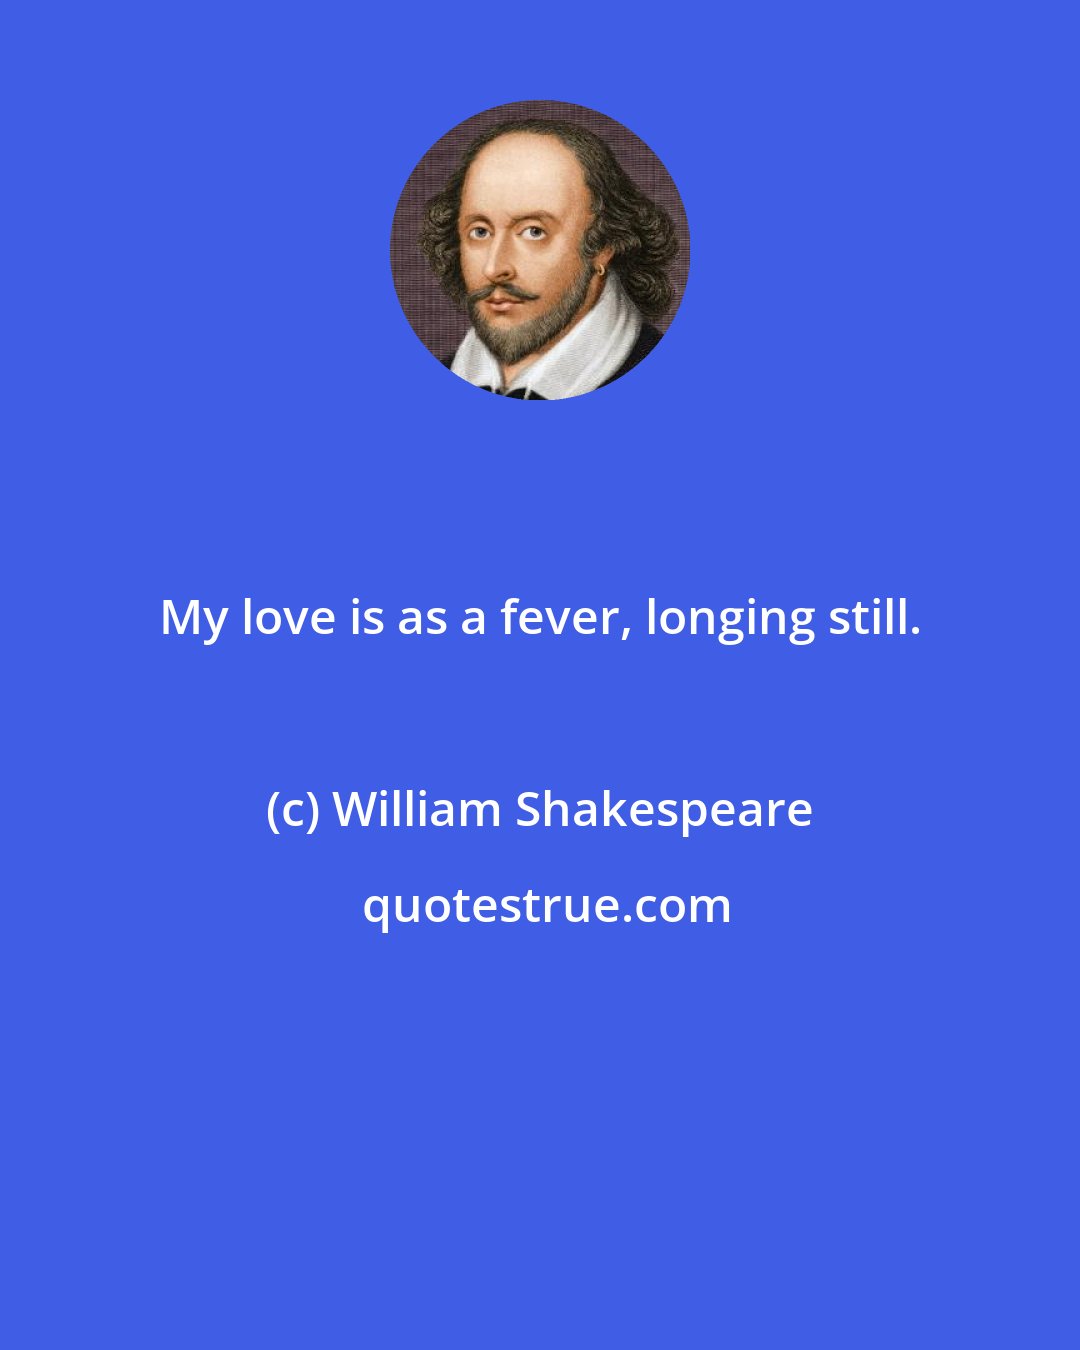 William Shakespeare: My love is as a fever, longing still.